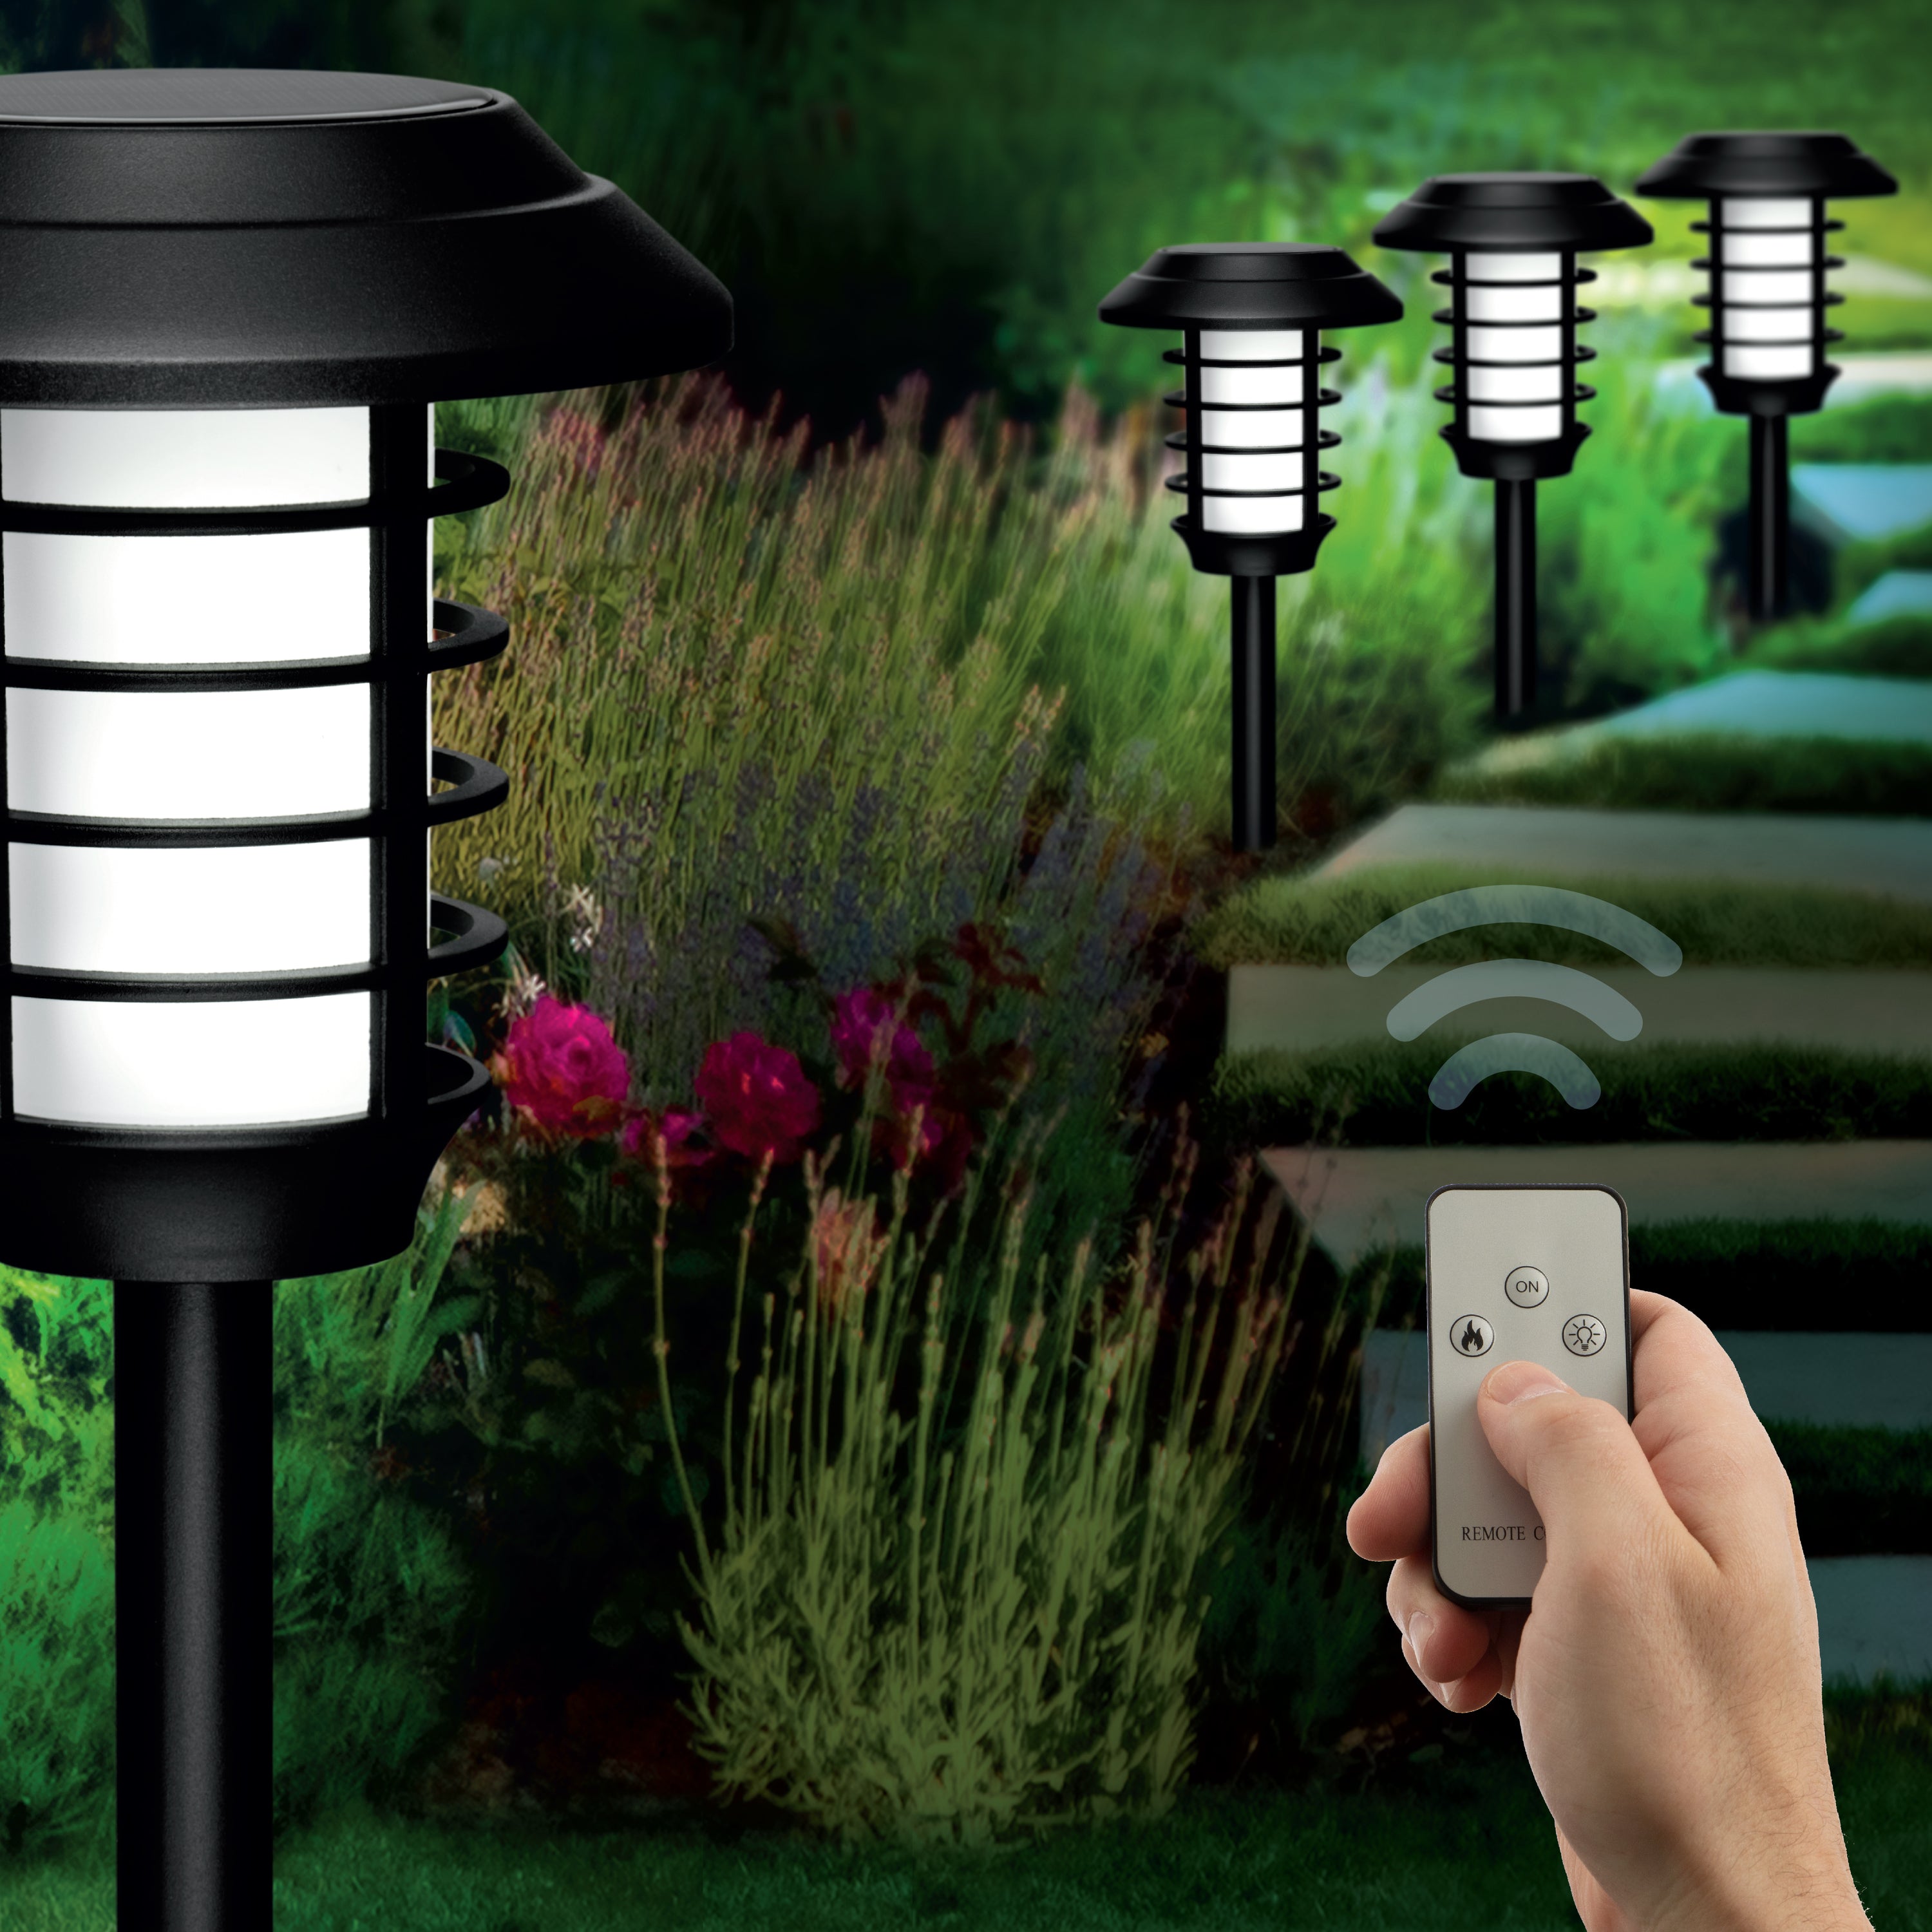 Bell + Howell Smart Solar Pathway Lights with Remote Control- 4 Pack